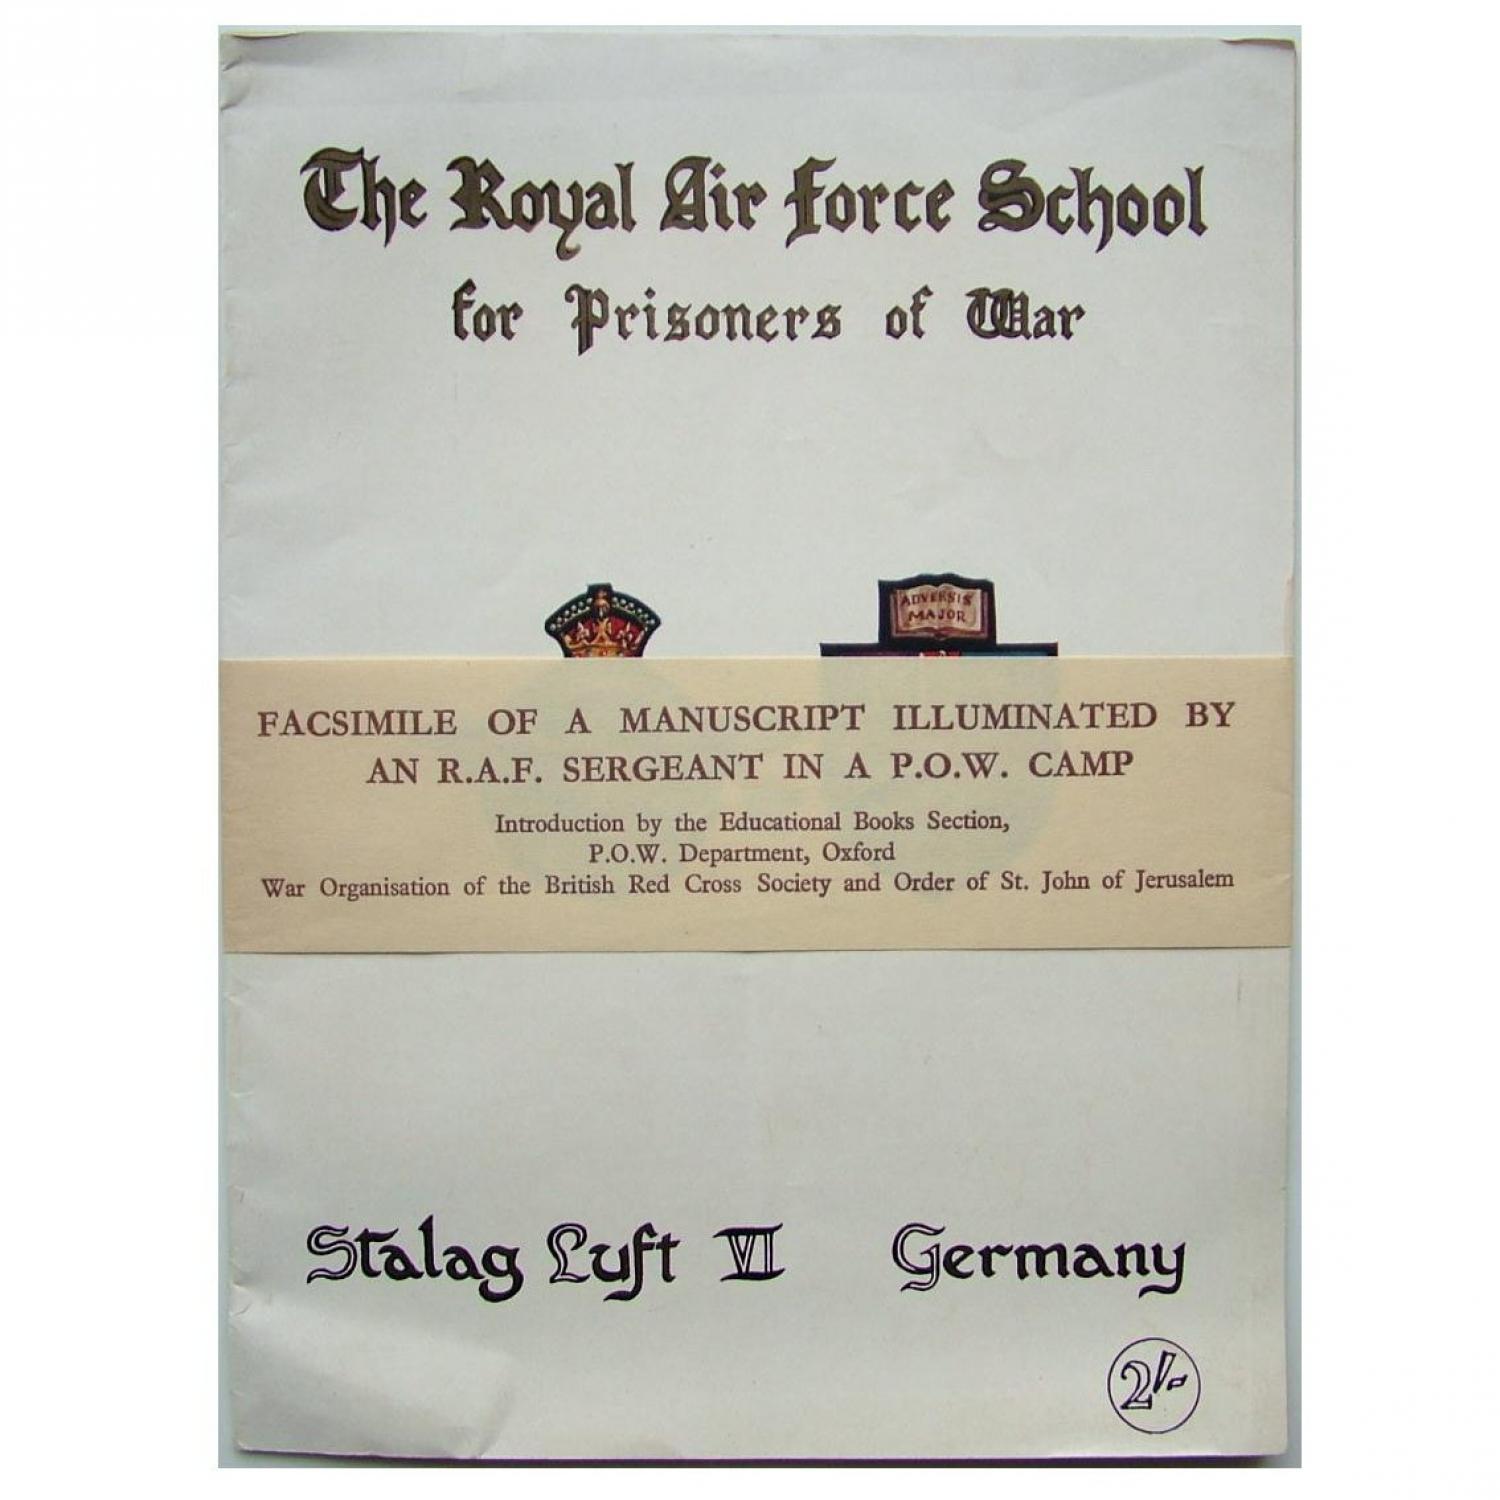 The Royal Air Force School for PoW